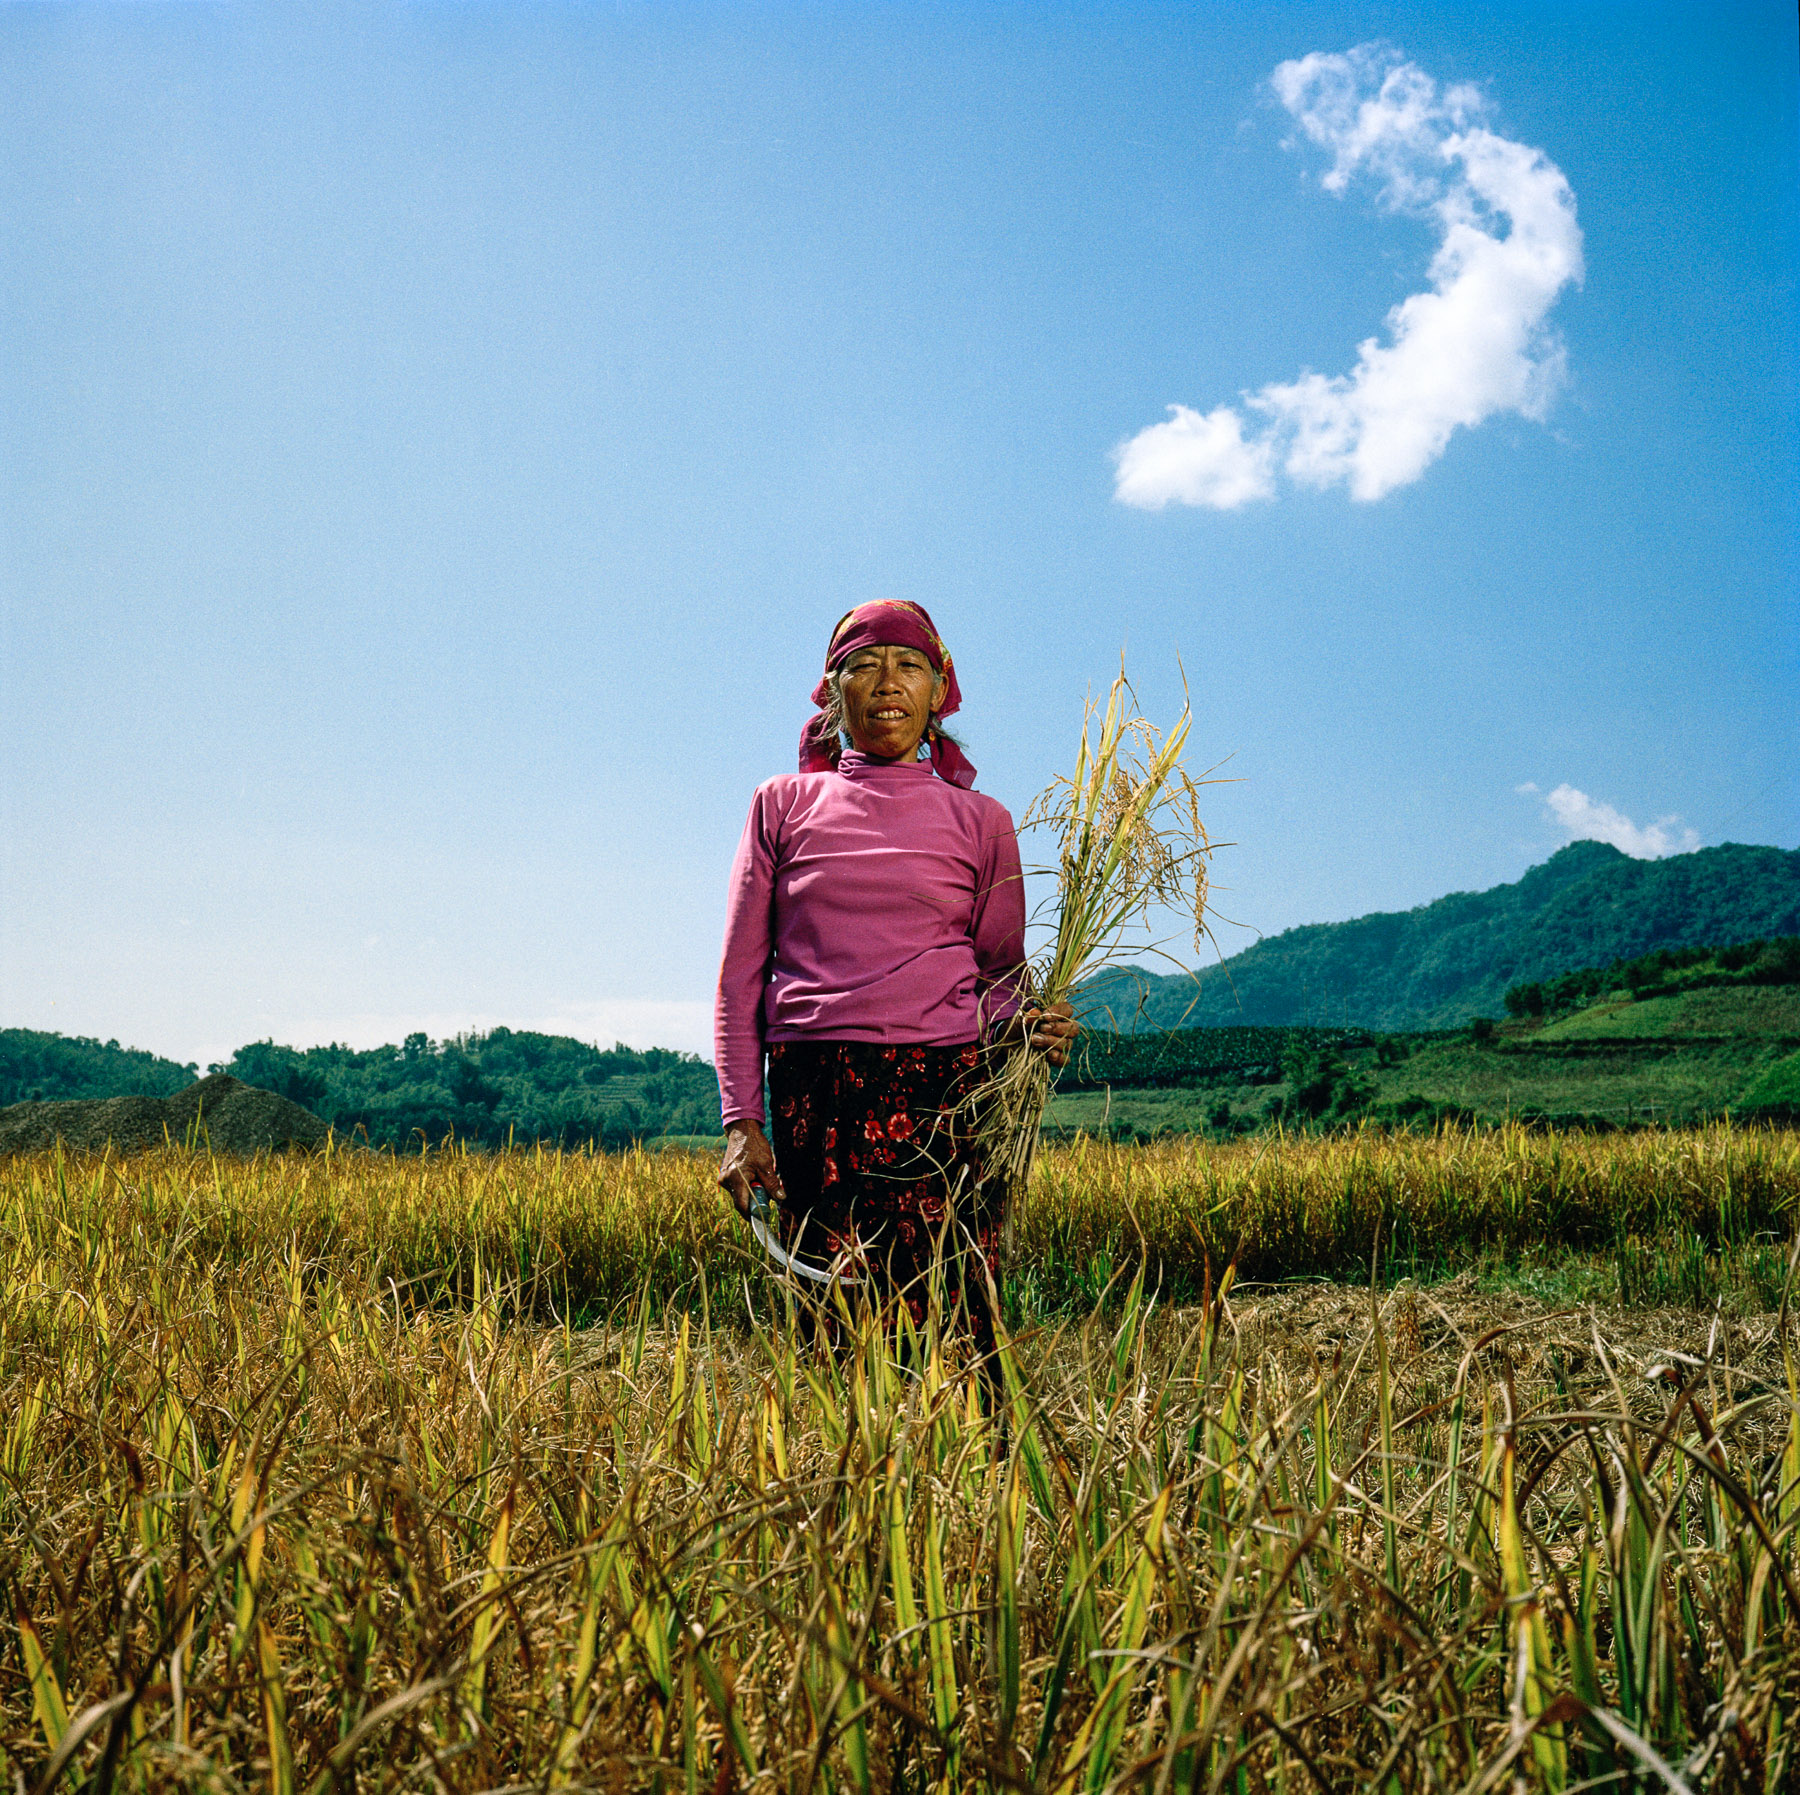  China, Yunnan province. Southern region of Xishuangbanna. Li Na Gen (Chinese name) is a 58-year old farmer of the Lahu minority. She was harvesting barley with her family when we found her. 